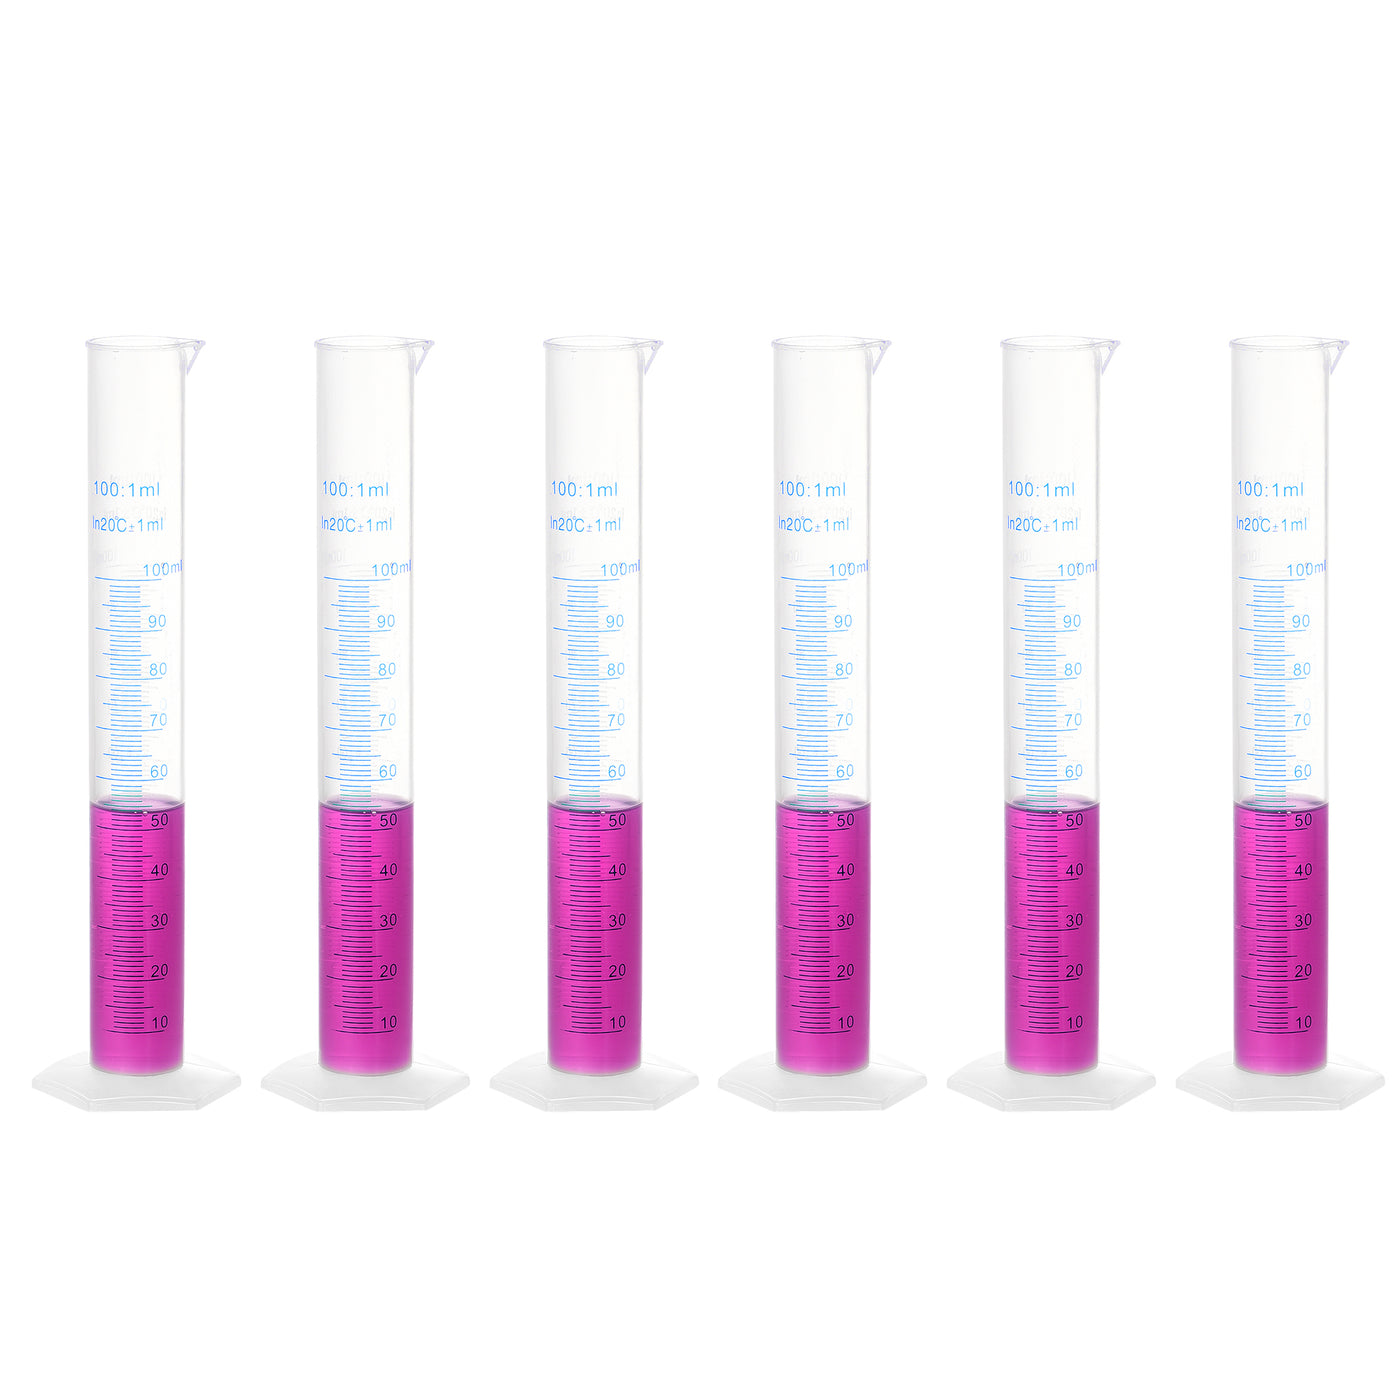 uxcell Uxcell Plastic Graduated Cylinder, 100ml Measuring Cylinder 2-Sided Metric Marking 6Pcs